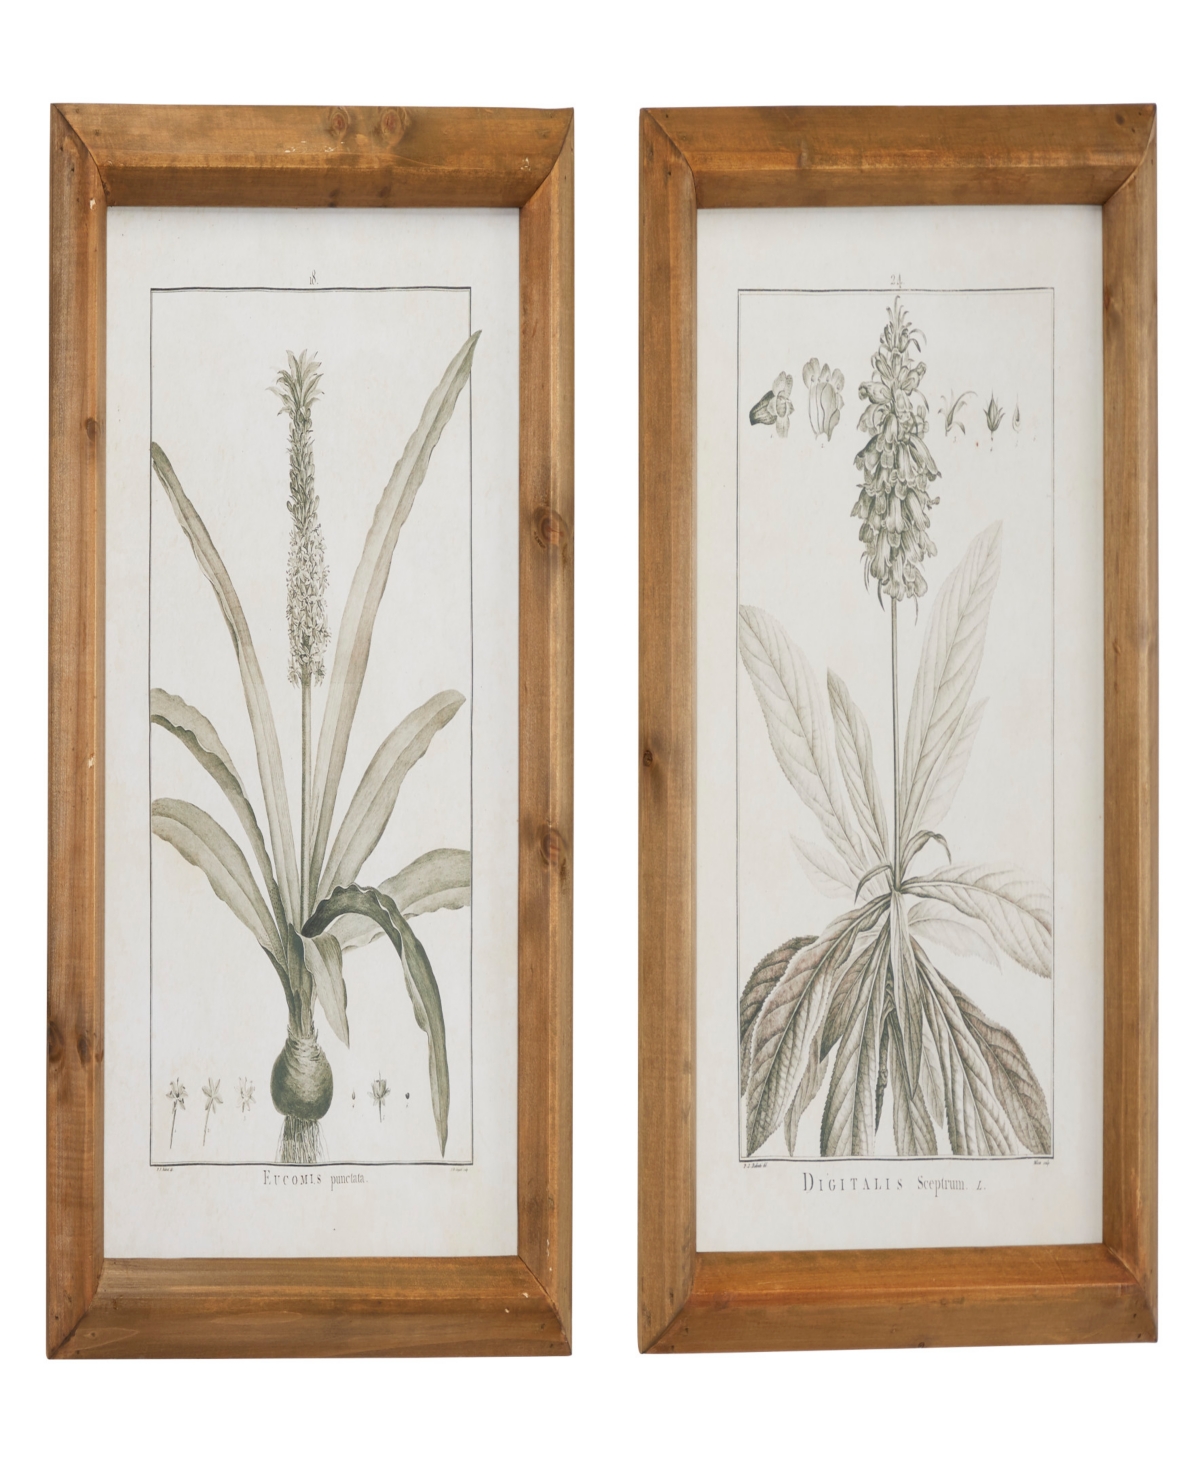 Rosemary Lane Wood Leaf Framed Wall Art With Brown Frame Set Of 2, 17" X 21" In Light Brown